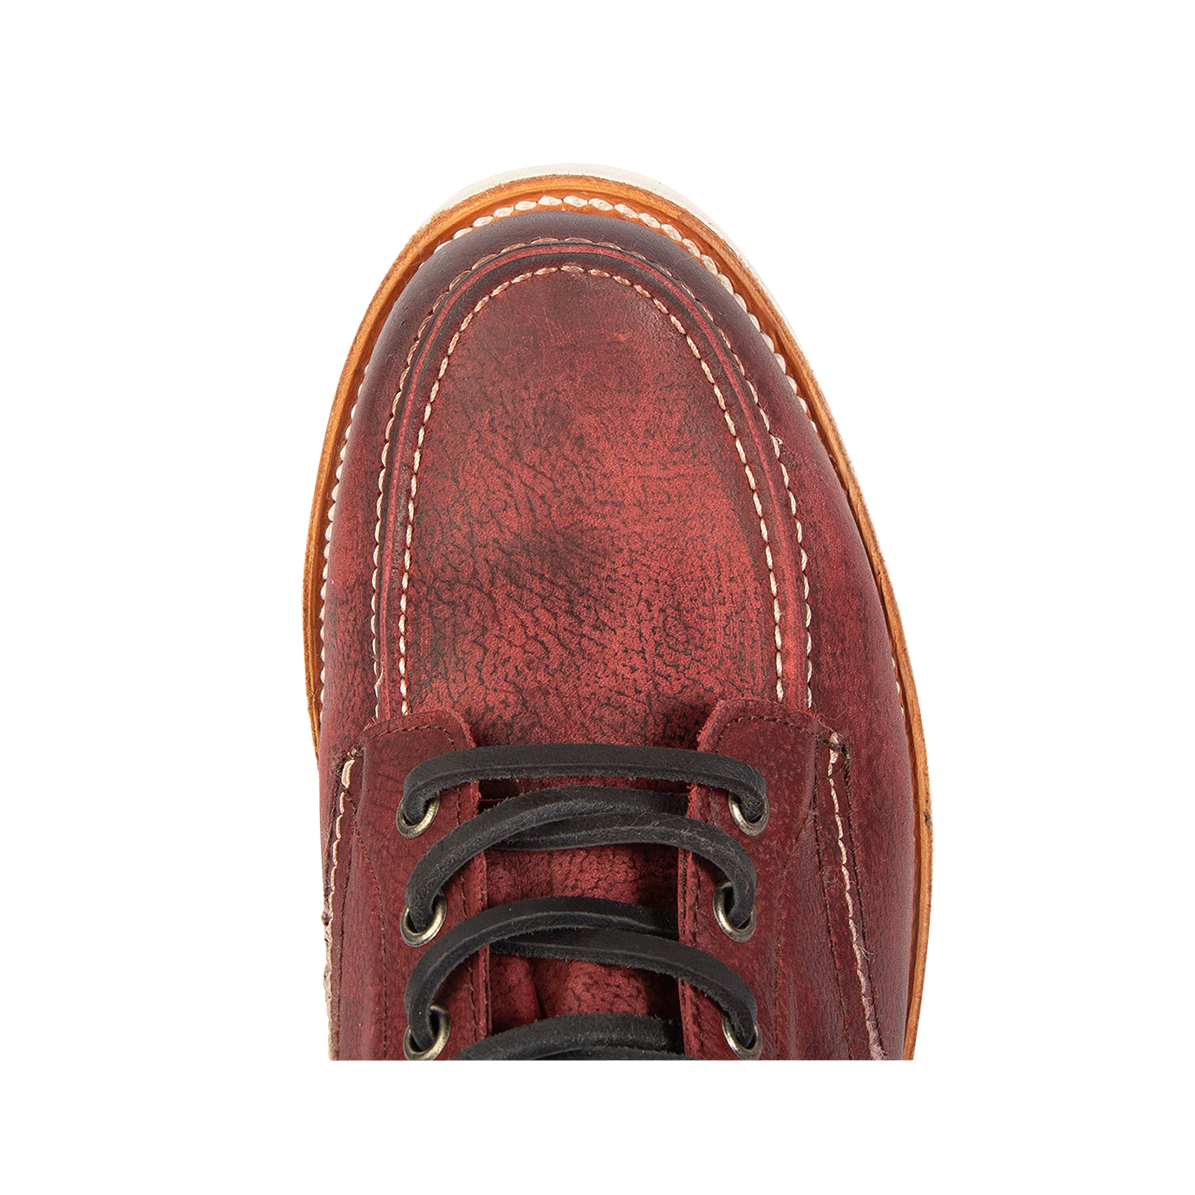 Top view showing round toe and leather lacing on FREEBIRD men's Carbon wine shoe